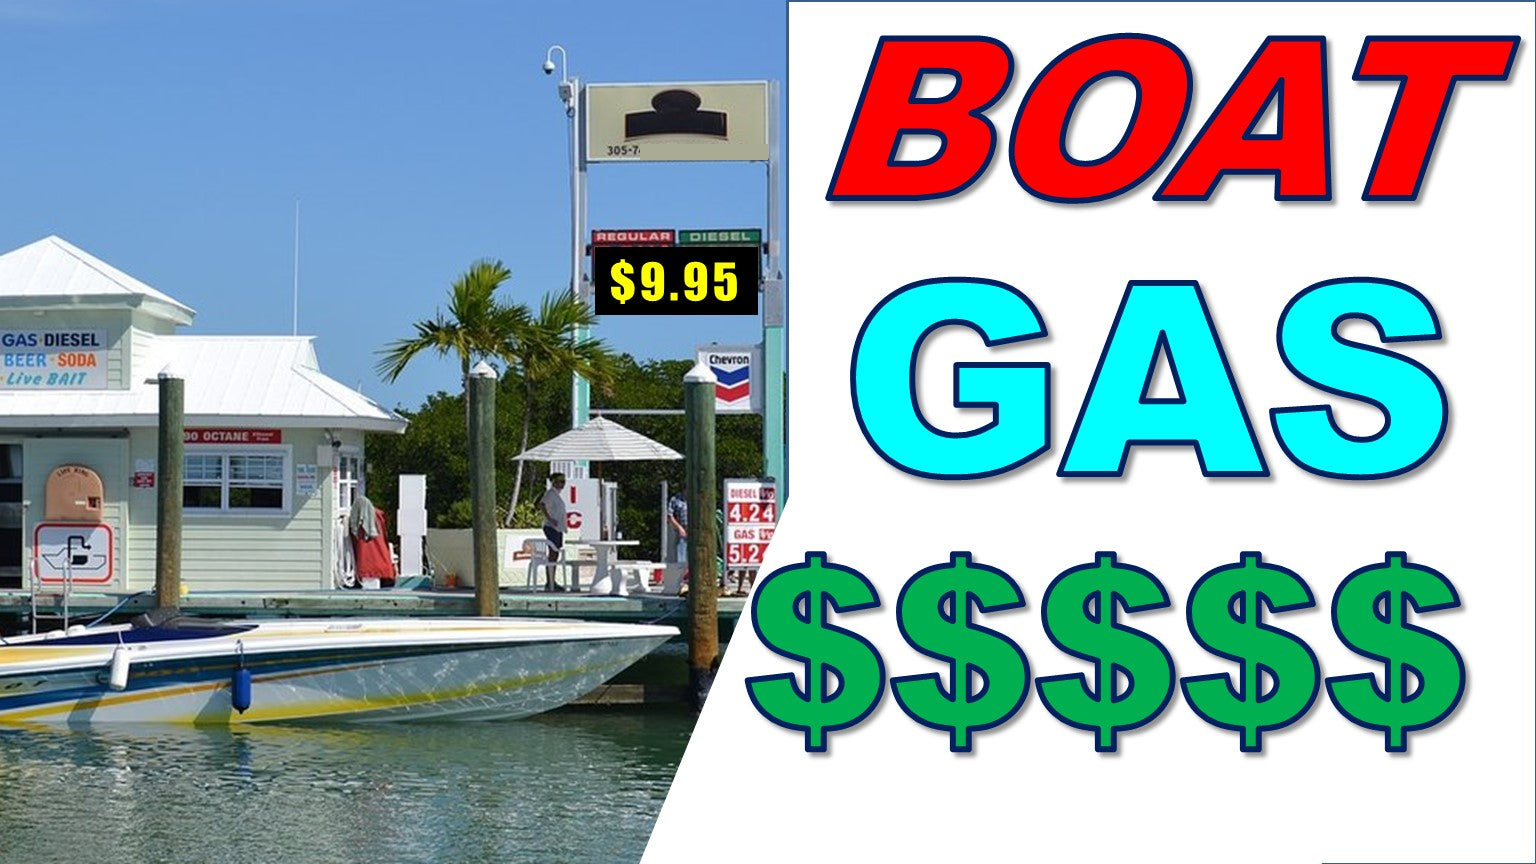 Save on Boat Gas